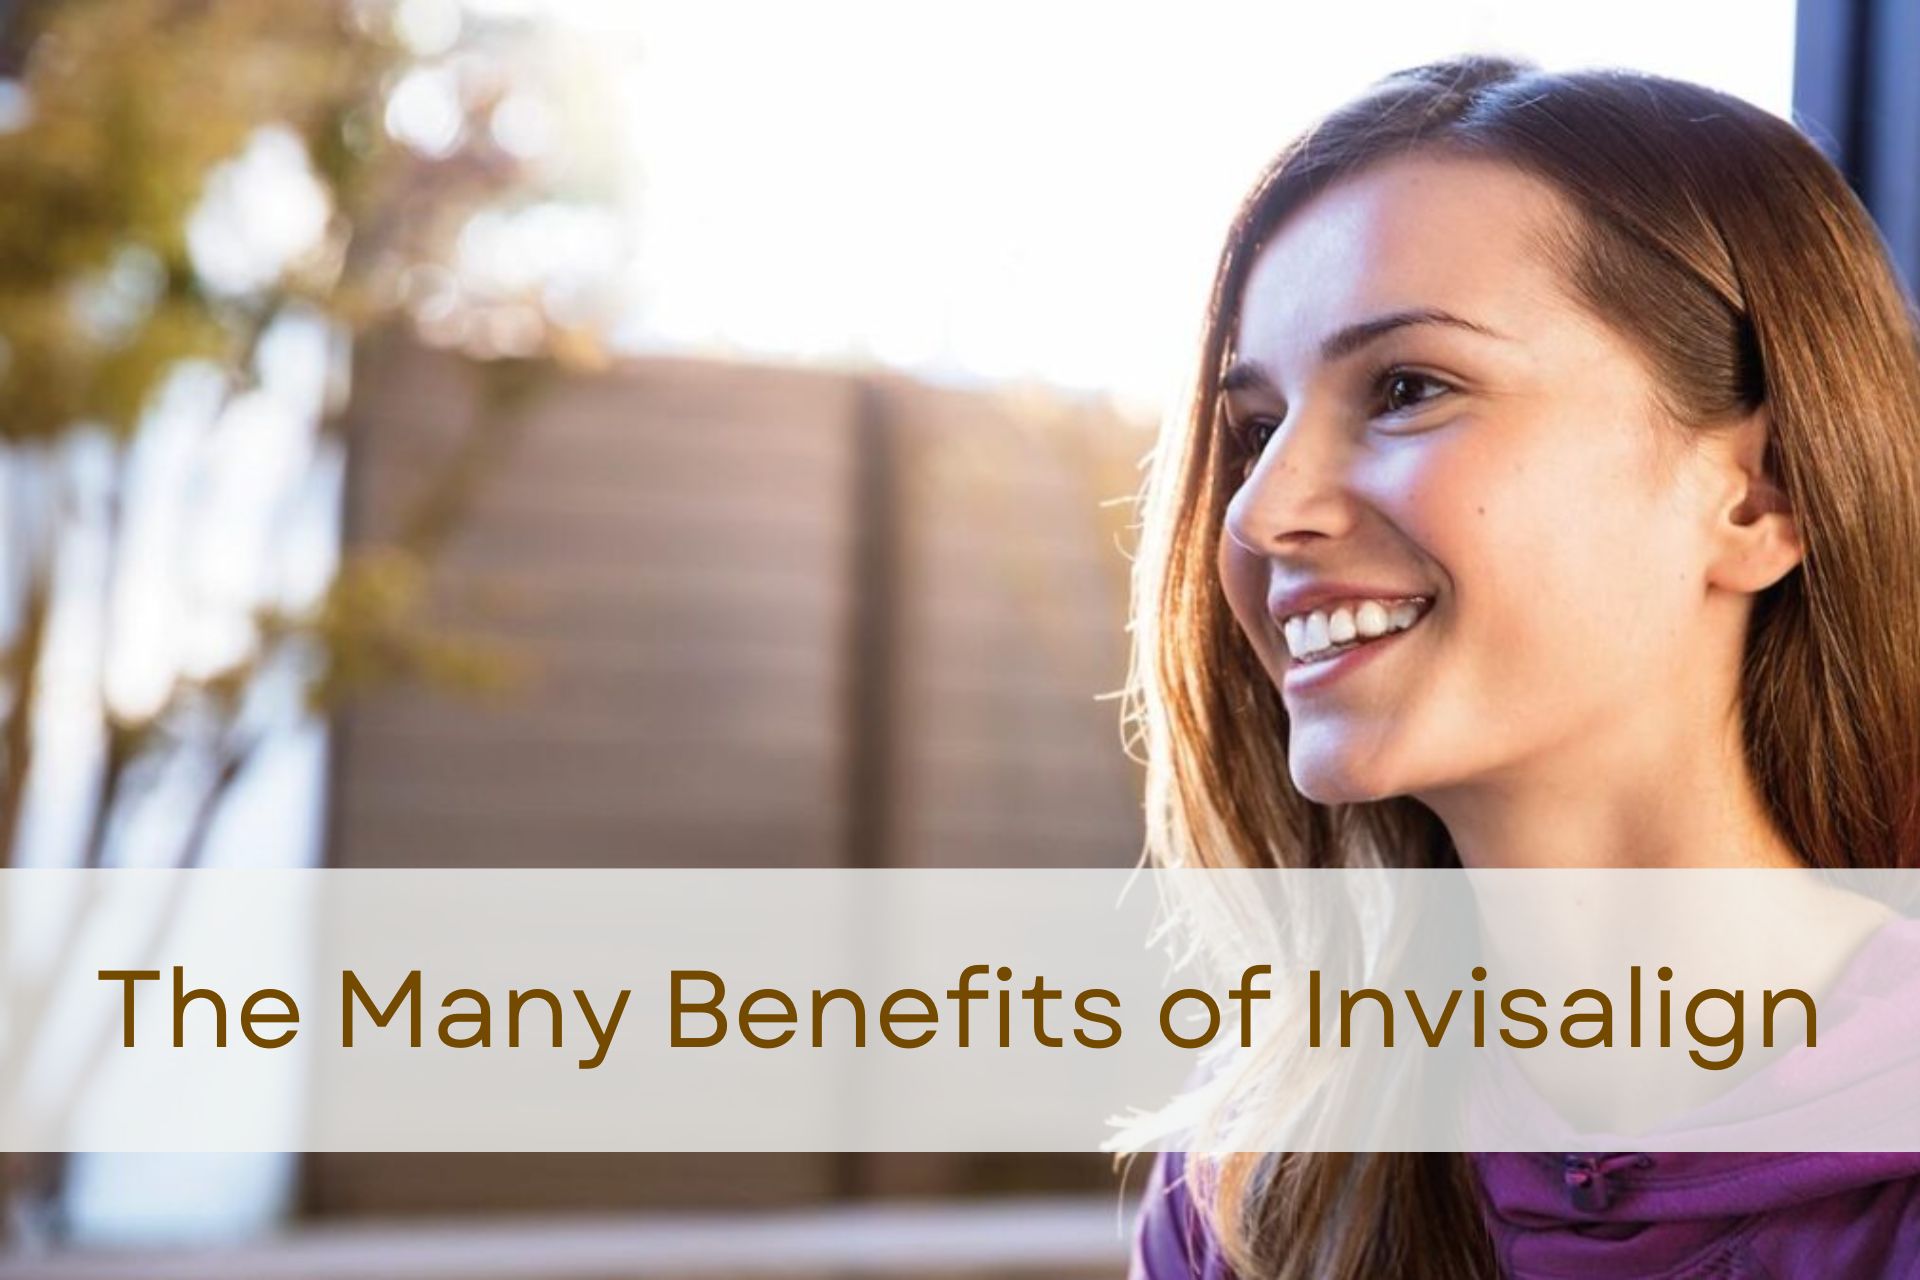 Girl experiencing the many benefits of Invisalign clear aligners